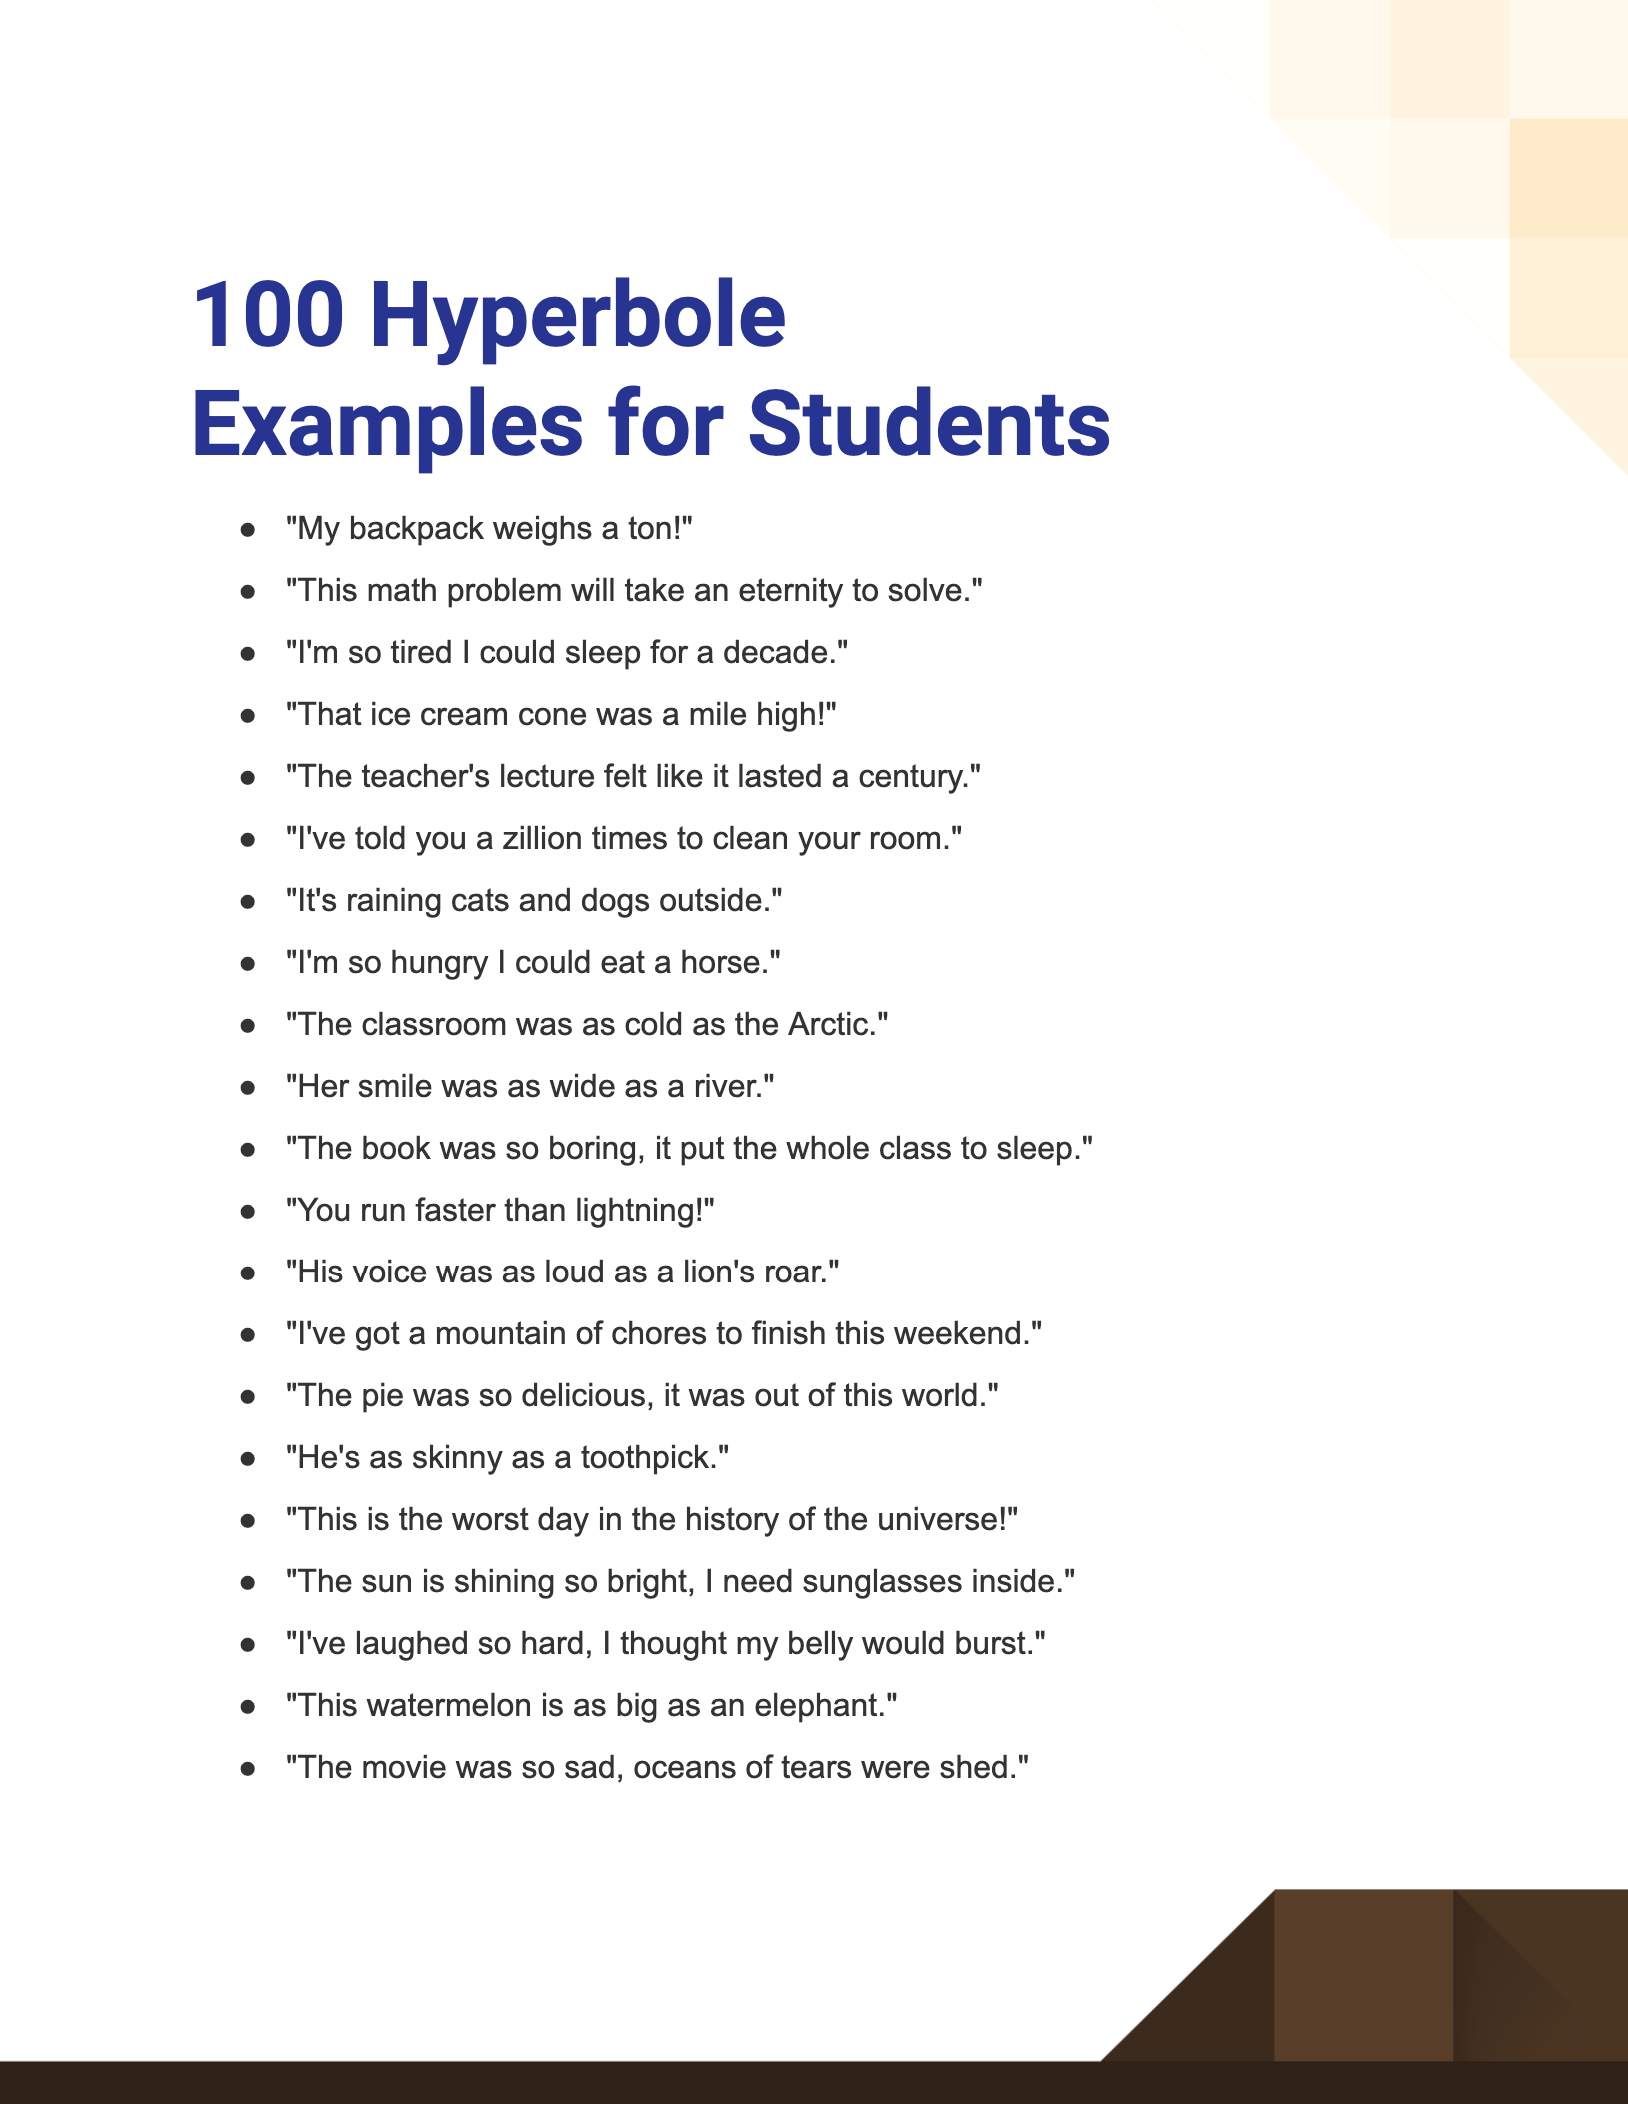 hyperbole examples for students1